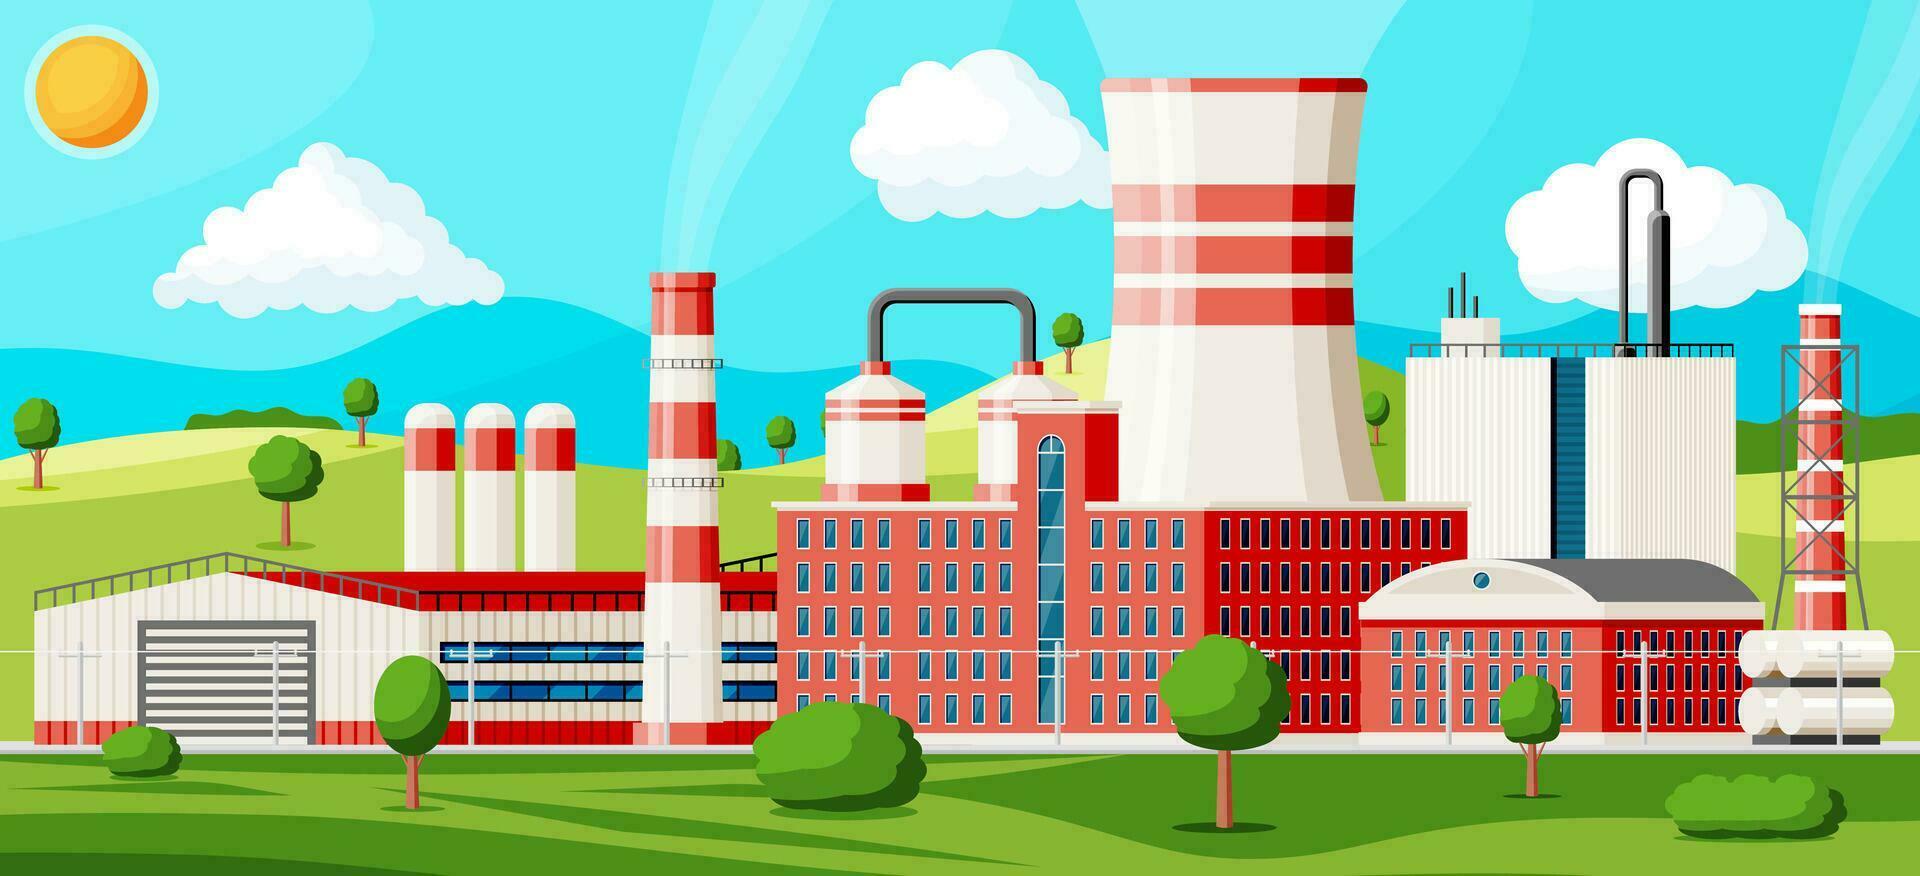 Factory Building With Nature Landscape. Industrial Factory, Power Plant. Pipes, Buildings, Warehouse, Storage Tank. Manufacture Or Processing Facility. Engineering House. Flat Vector Illustration